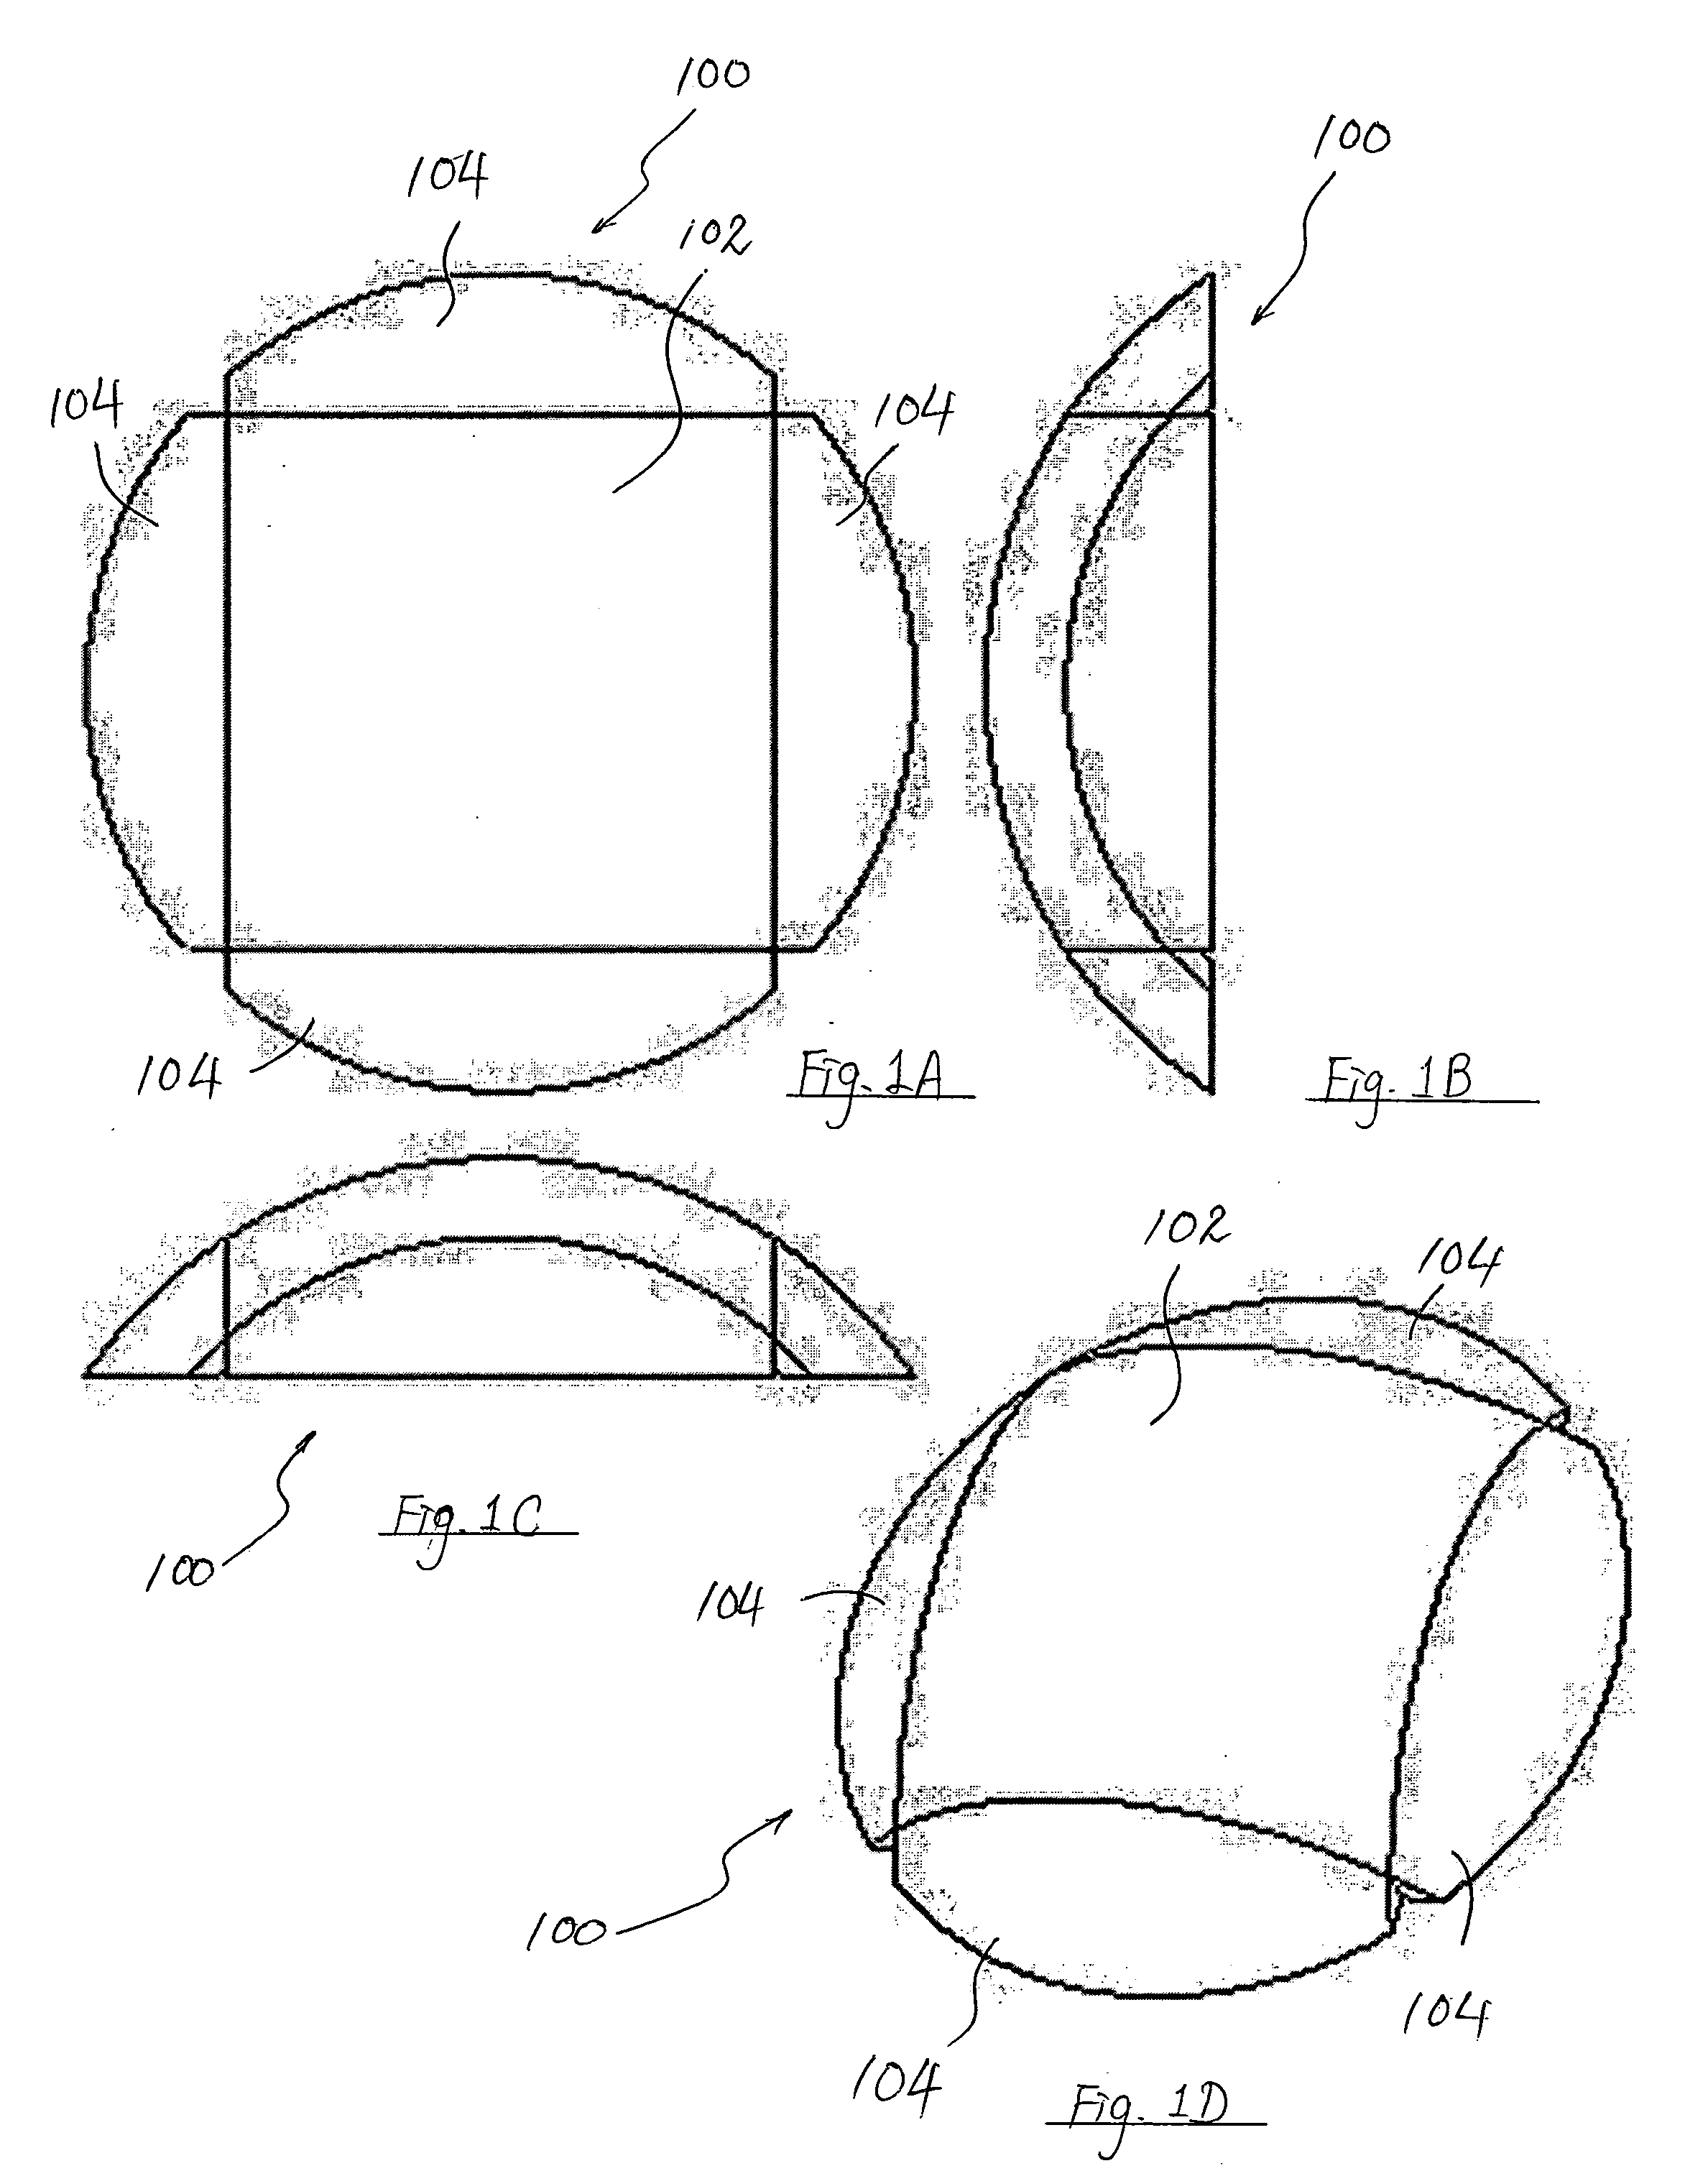 3-Dimensional puzzle and method of forming same